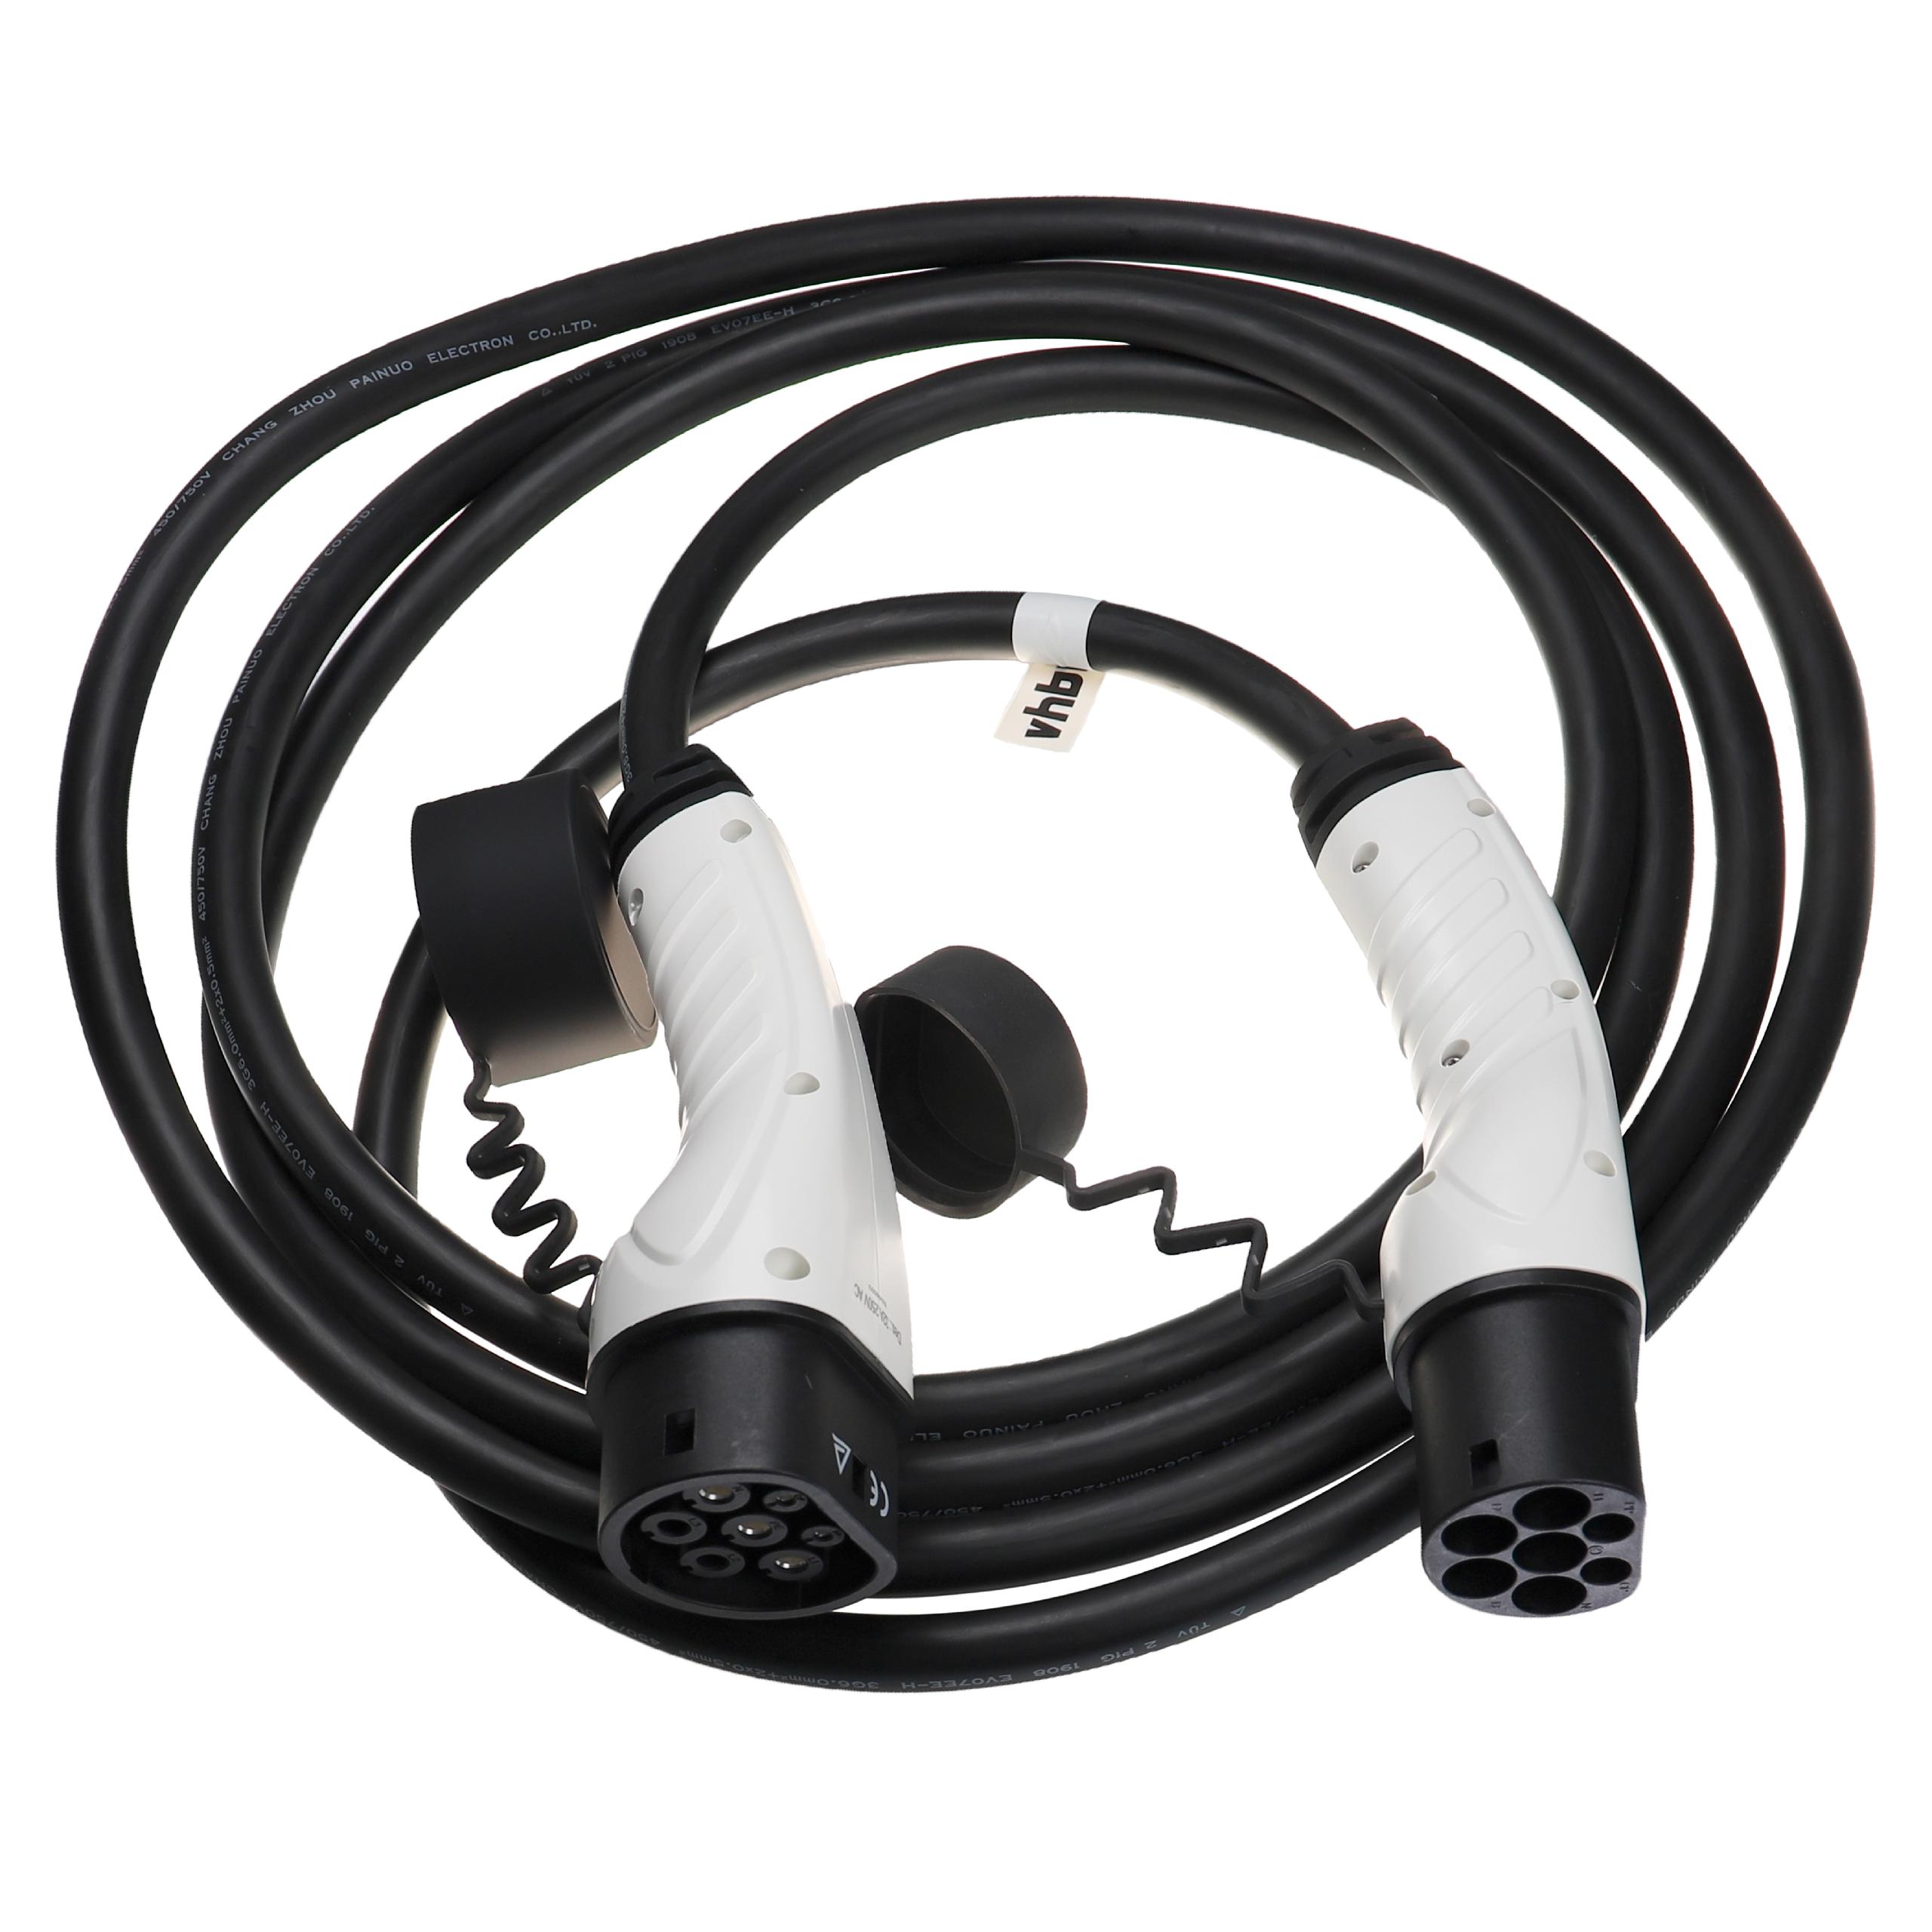 Charging Cable for Electric Car, Plug-In Hybrid - Type 2 to Type 2 Cable, Single-Phase, 32 A, 7 kW, 5 m